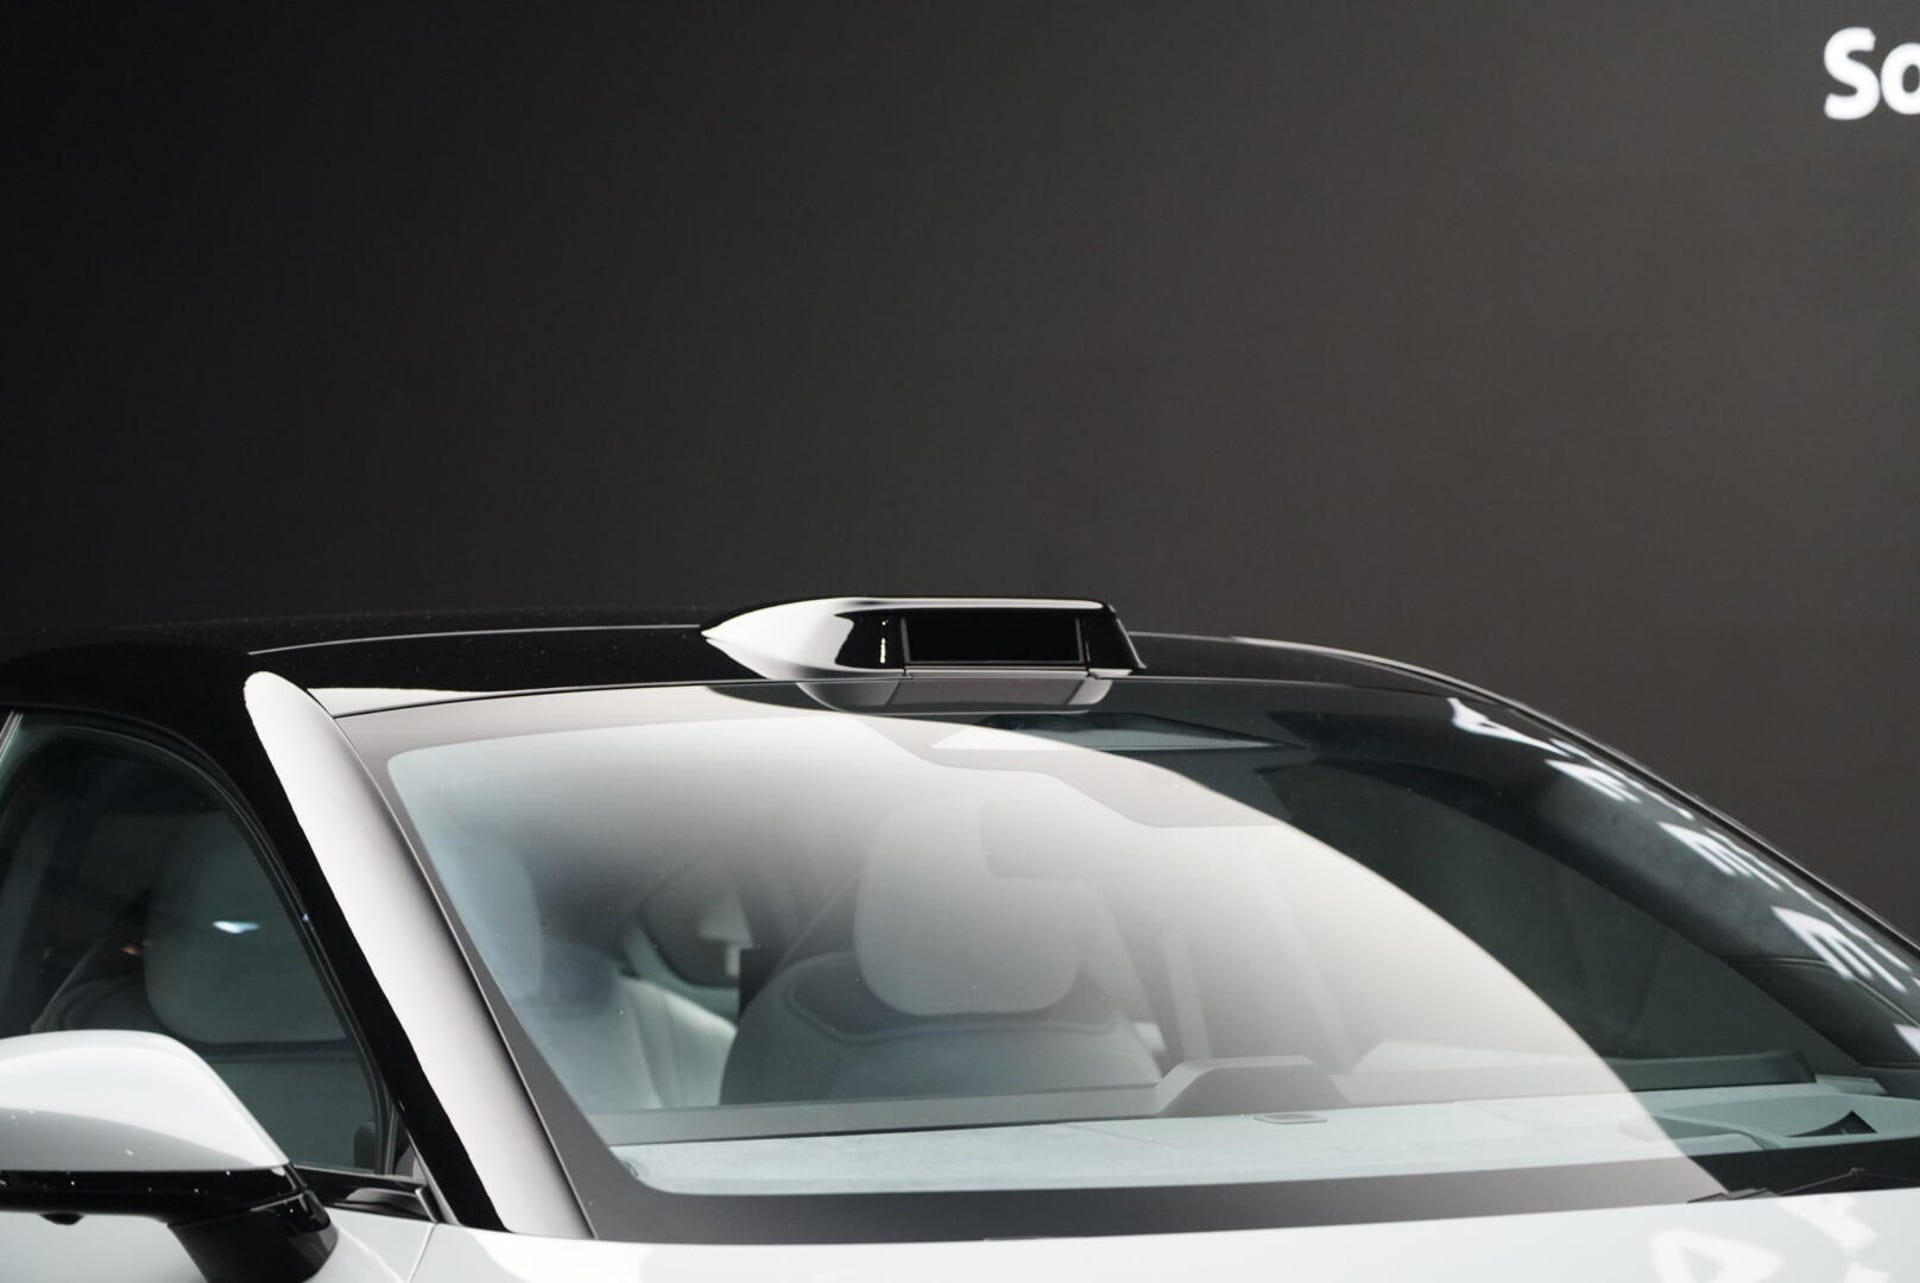 Driver aid sensor atop the Afeela concept's roof